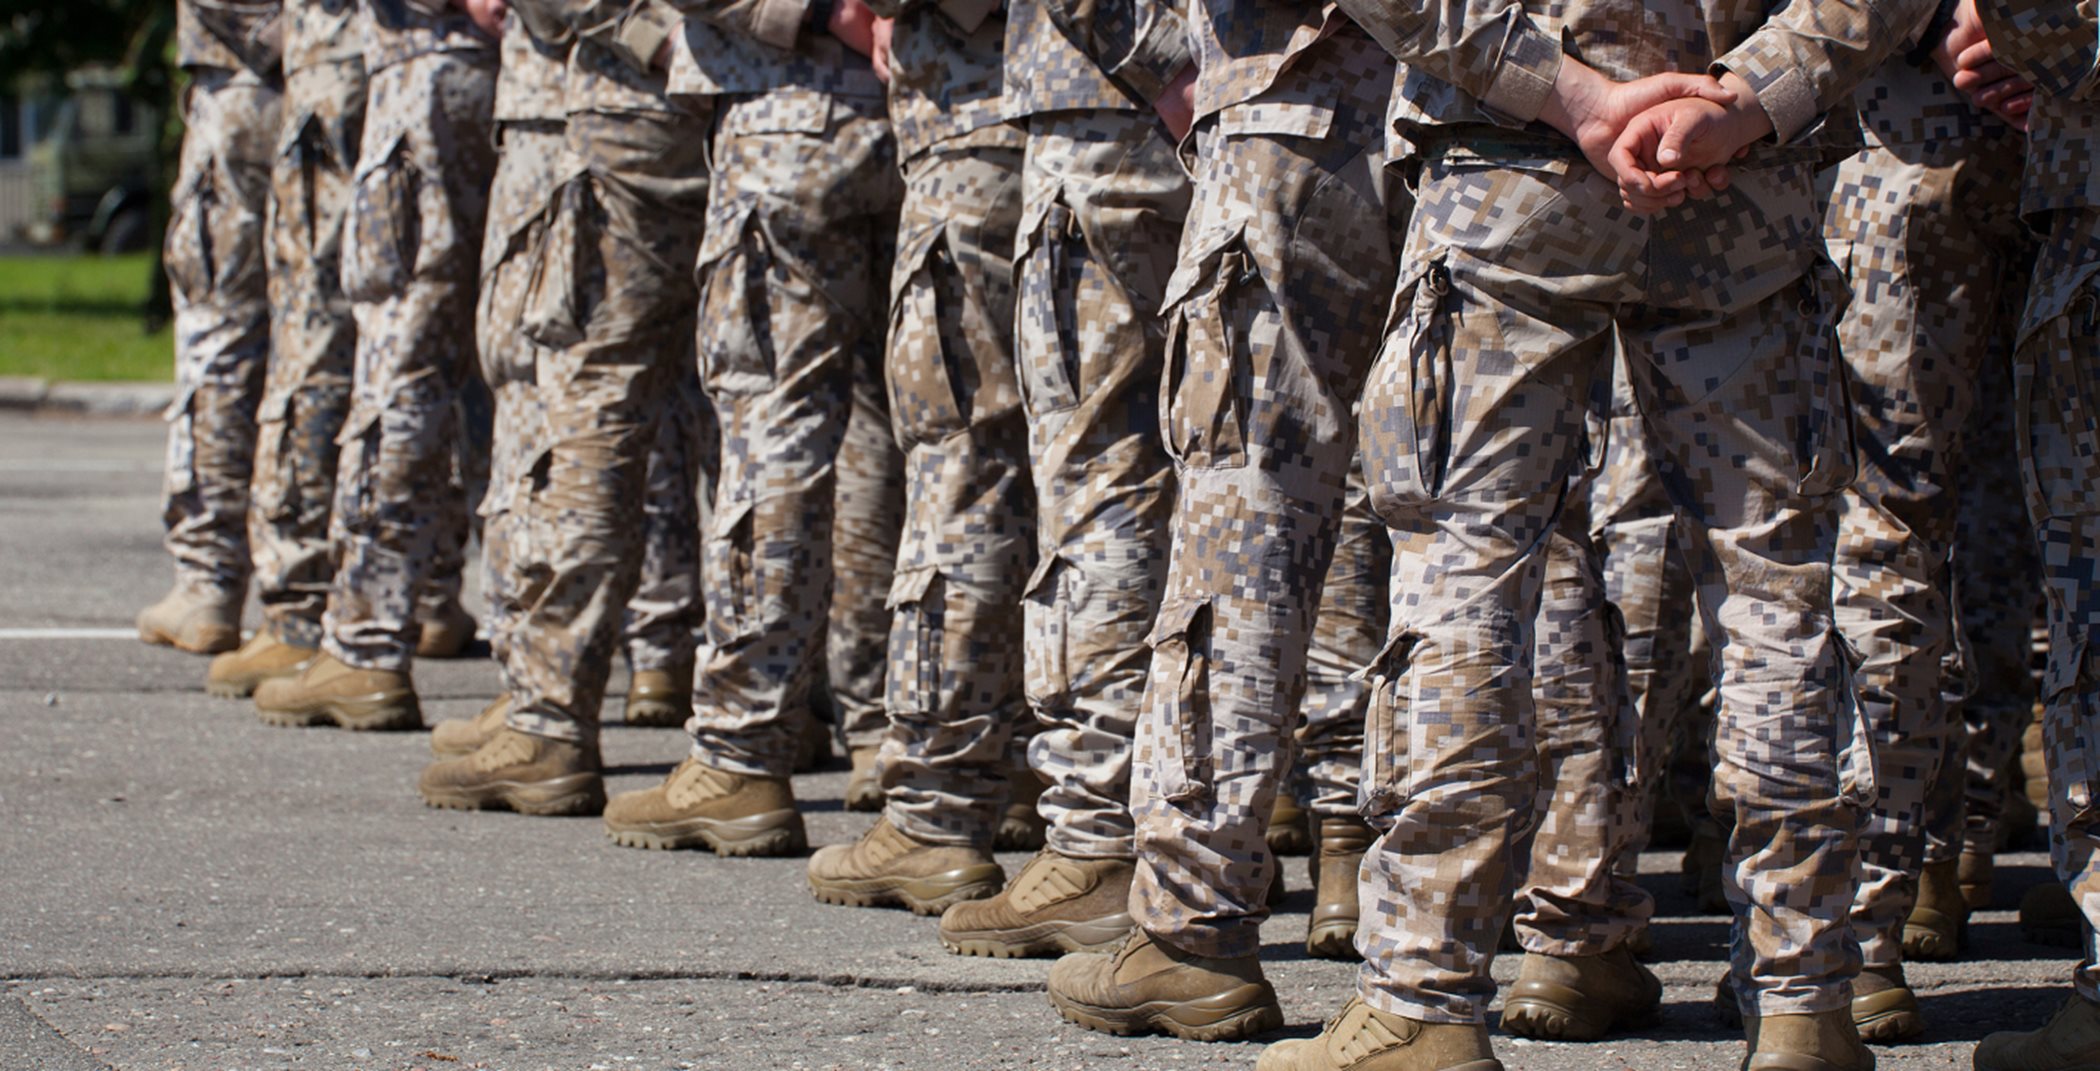 A line of people in army uniforms. Only the bottom of their bodies are visible.